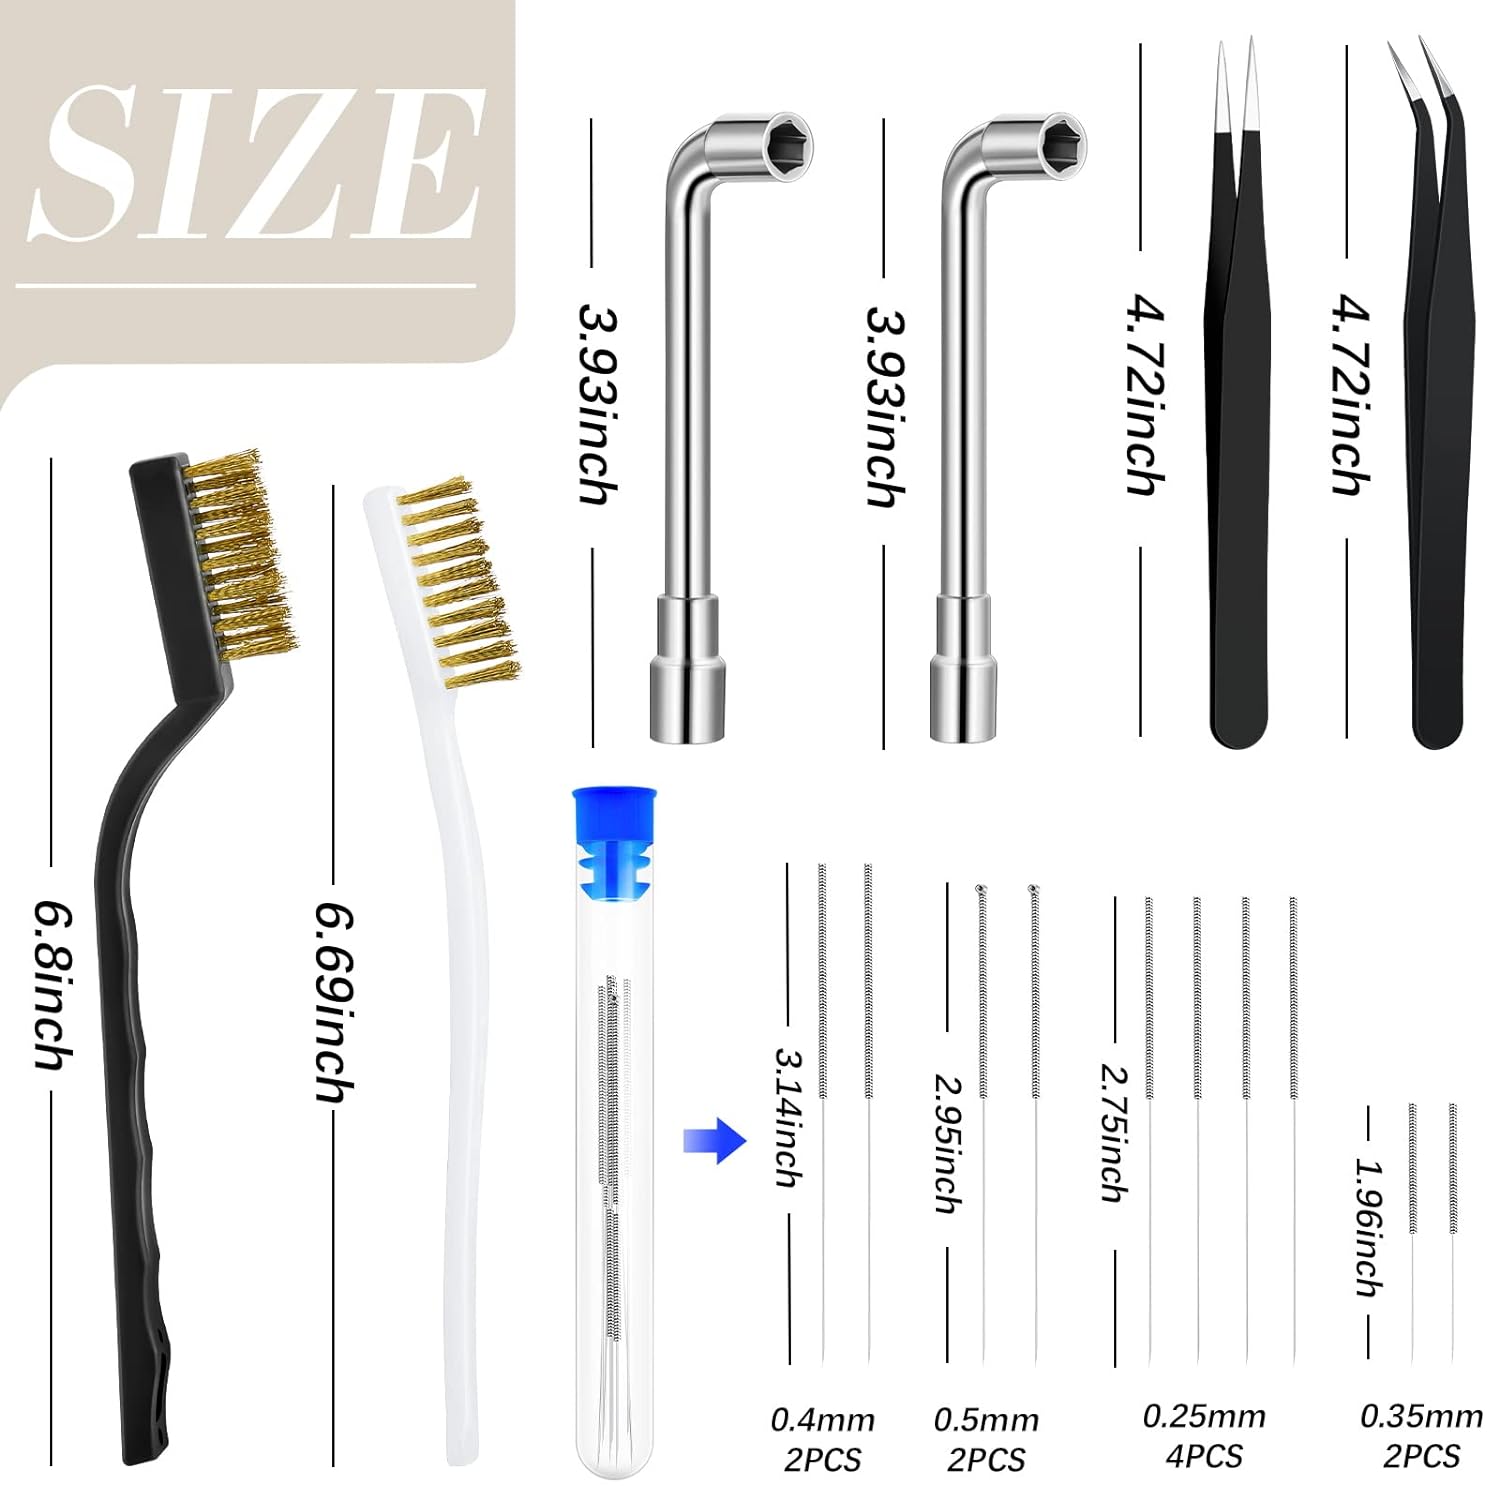 16-pieces-3d-printer-nozzle-wrench-cleaning-kit10-nozzle-cleaning-pins-with-storage-box-2-tweezers-2-cleaning-copper-wir-1 16 Pieces 3D Printer Nozzle Cleaning Kit Review